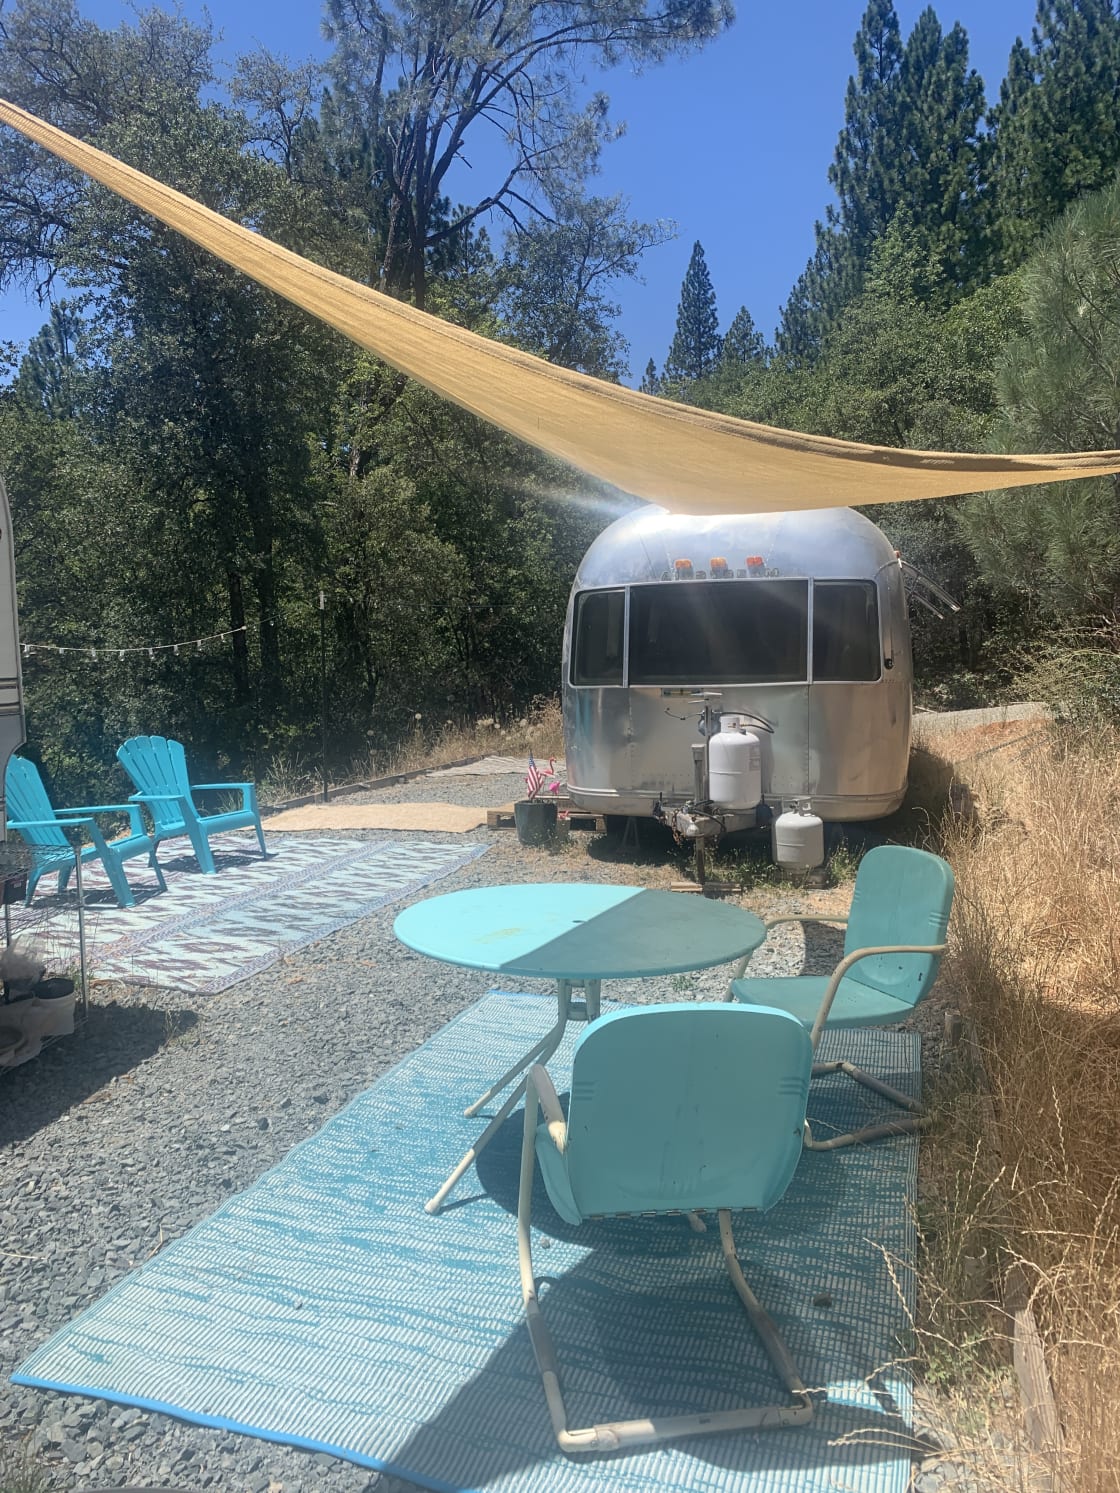 Coco the Airstream and outdoor dining area